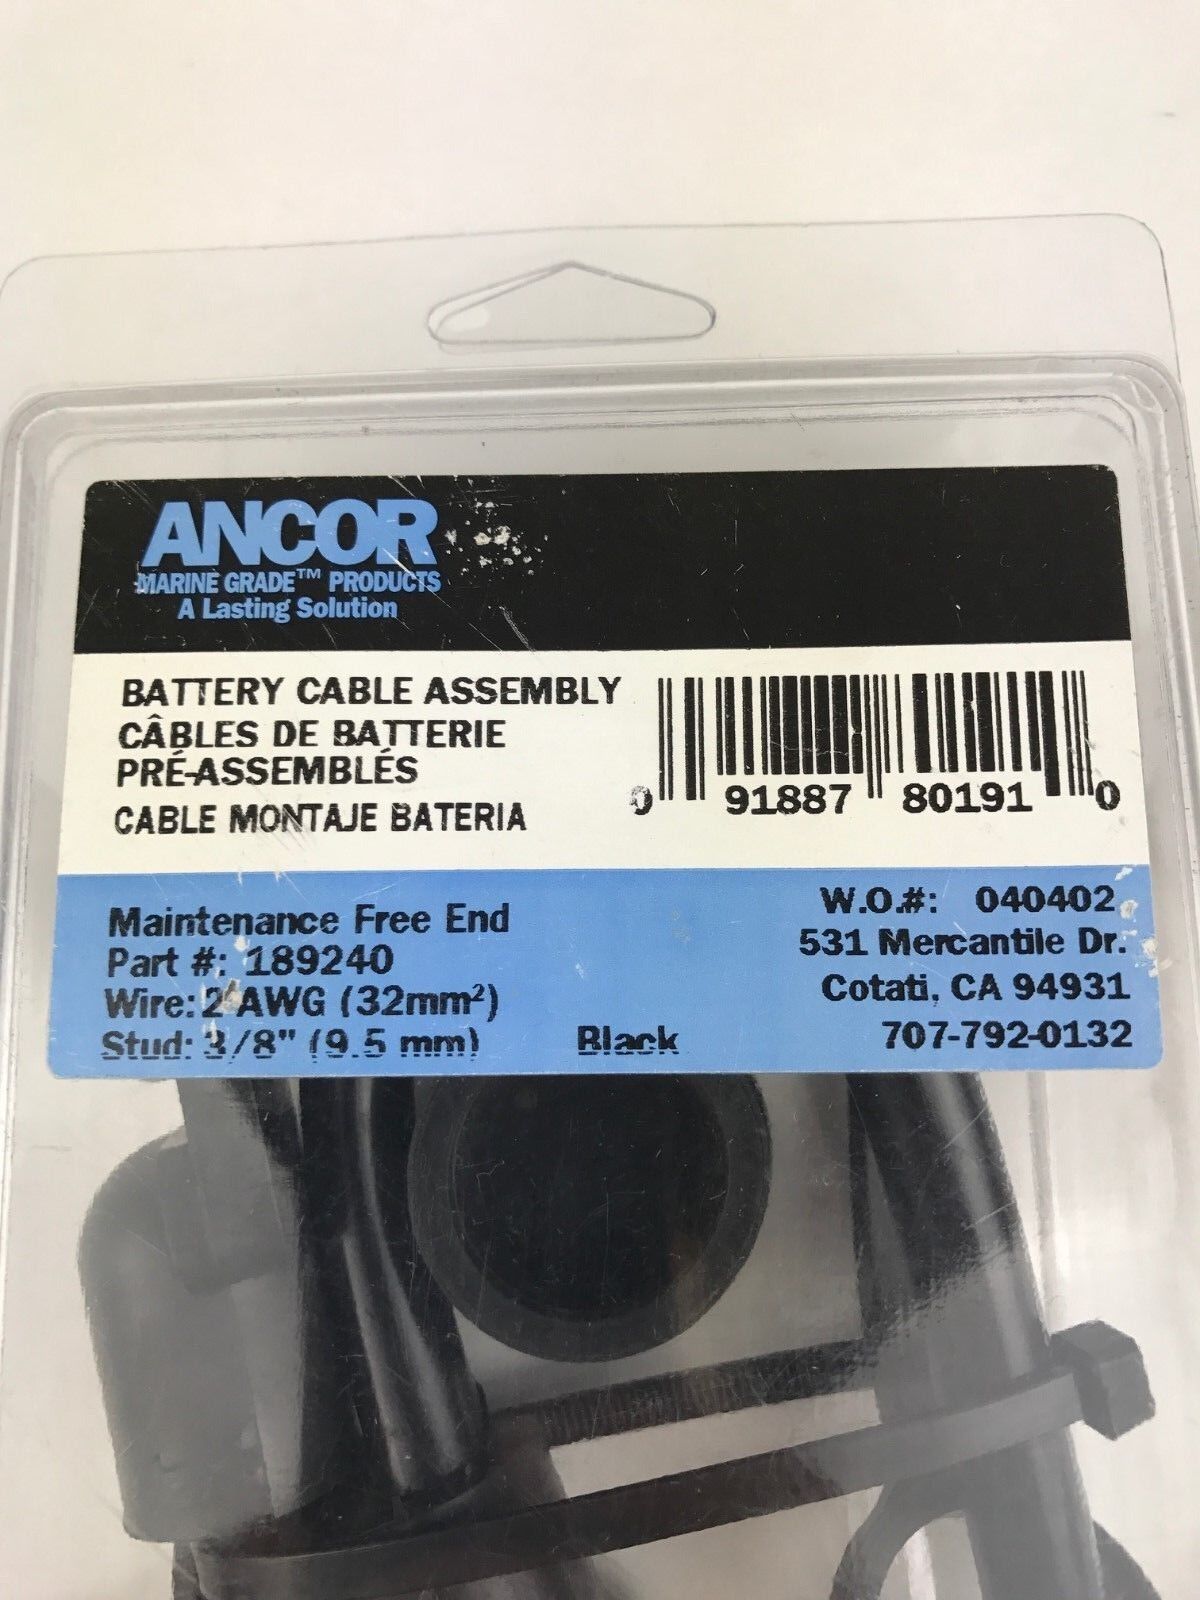 189240 - Ancor Battery Cable Assembly, 2 AWG (32mm) Wire, 3/8